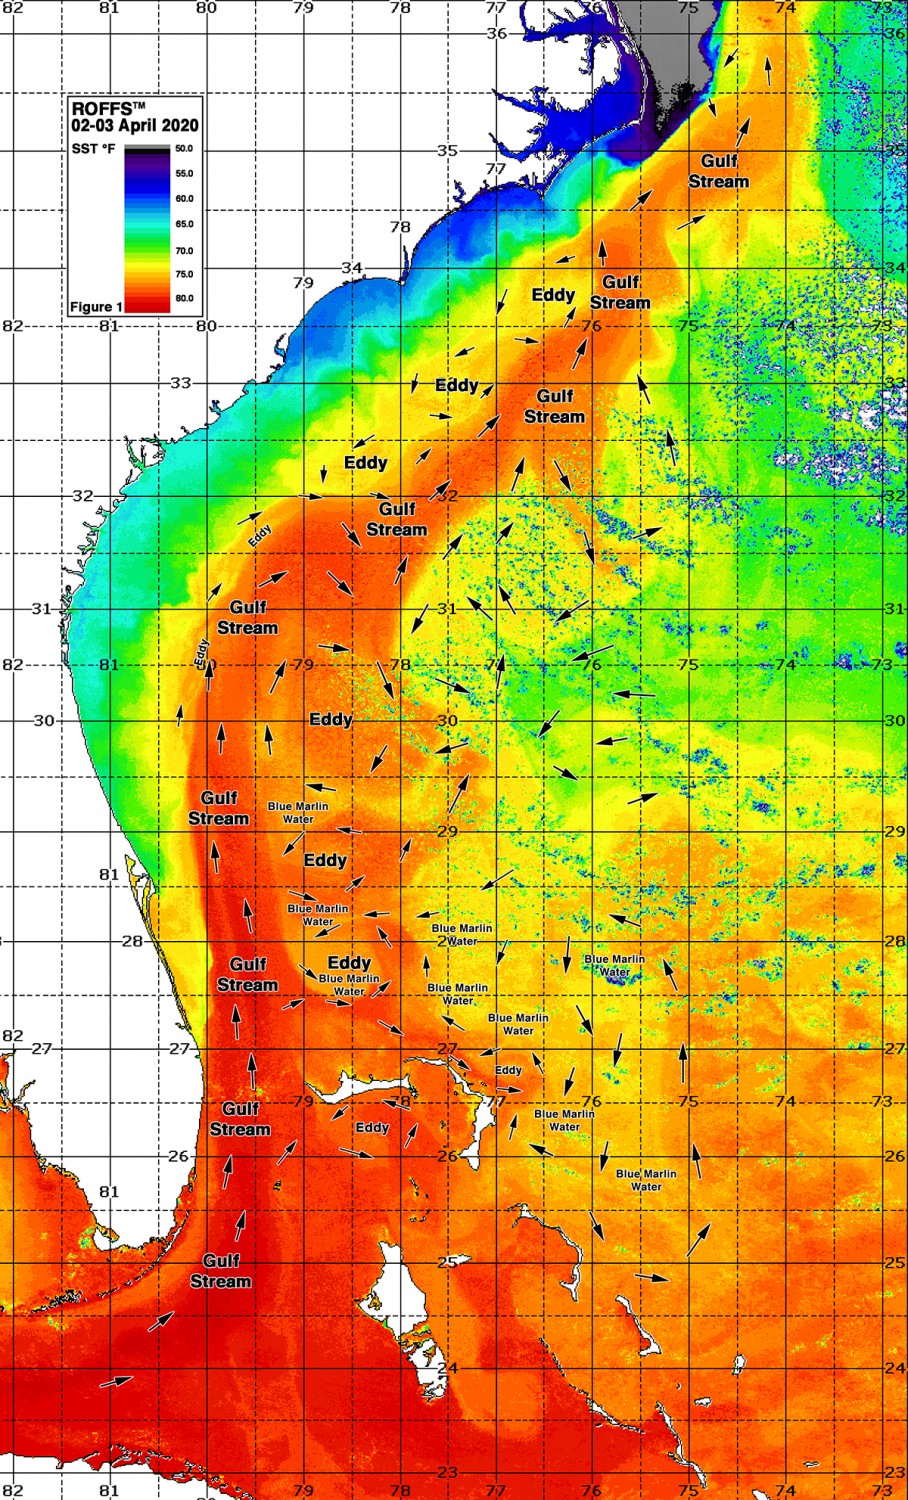 ROFFS™ Southern FL to Cape Hatteras Spring Season Preview 2020 UPDATE ON THE US EAST COAST GULF STREAM CONDITIONS